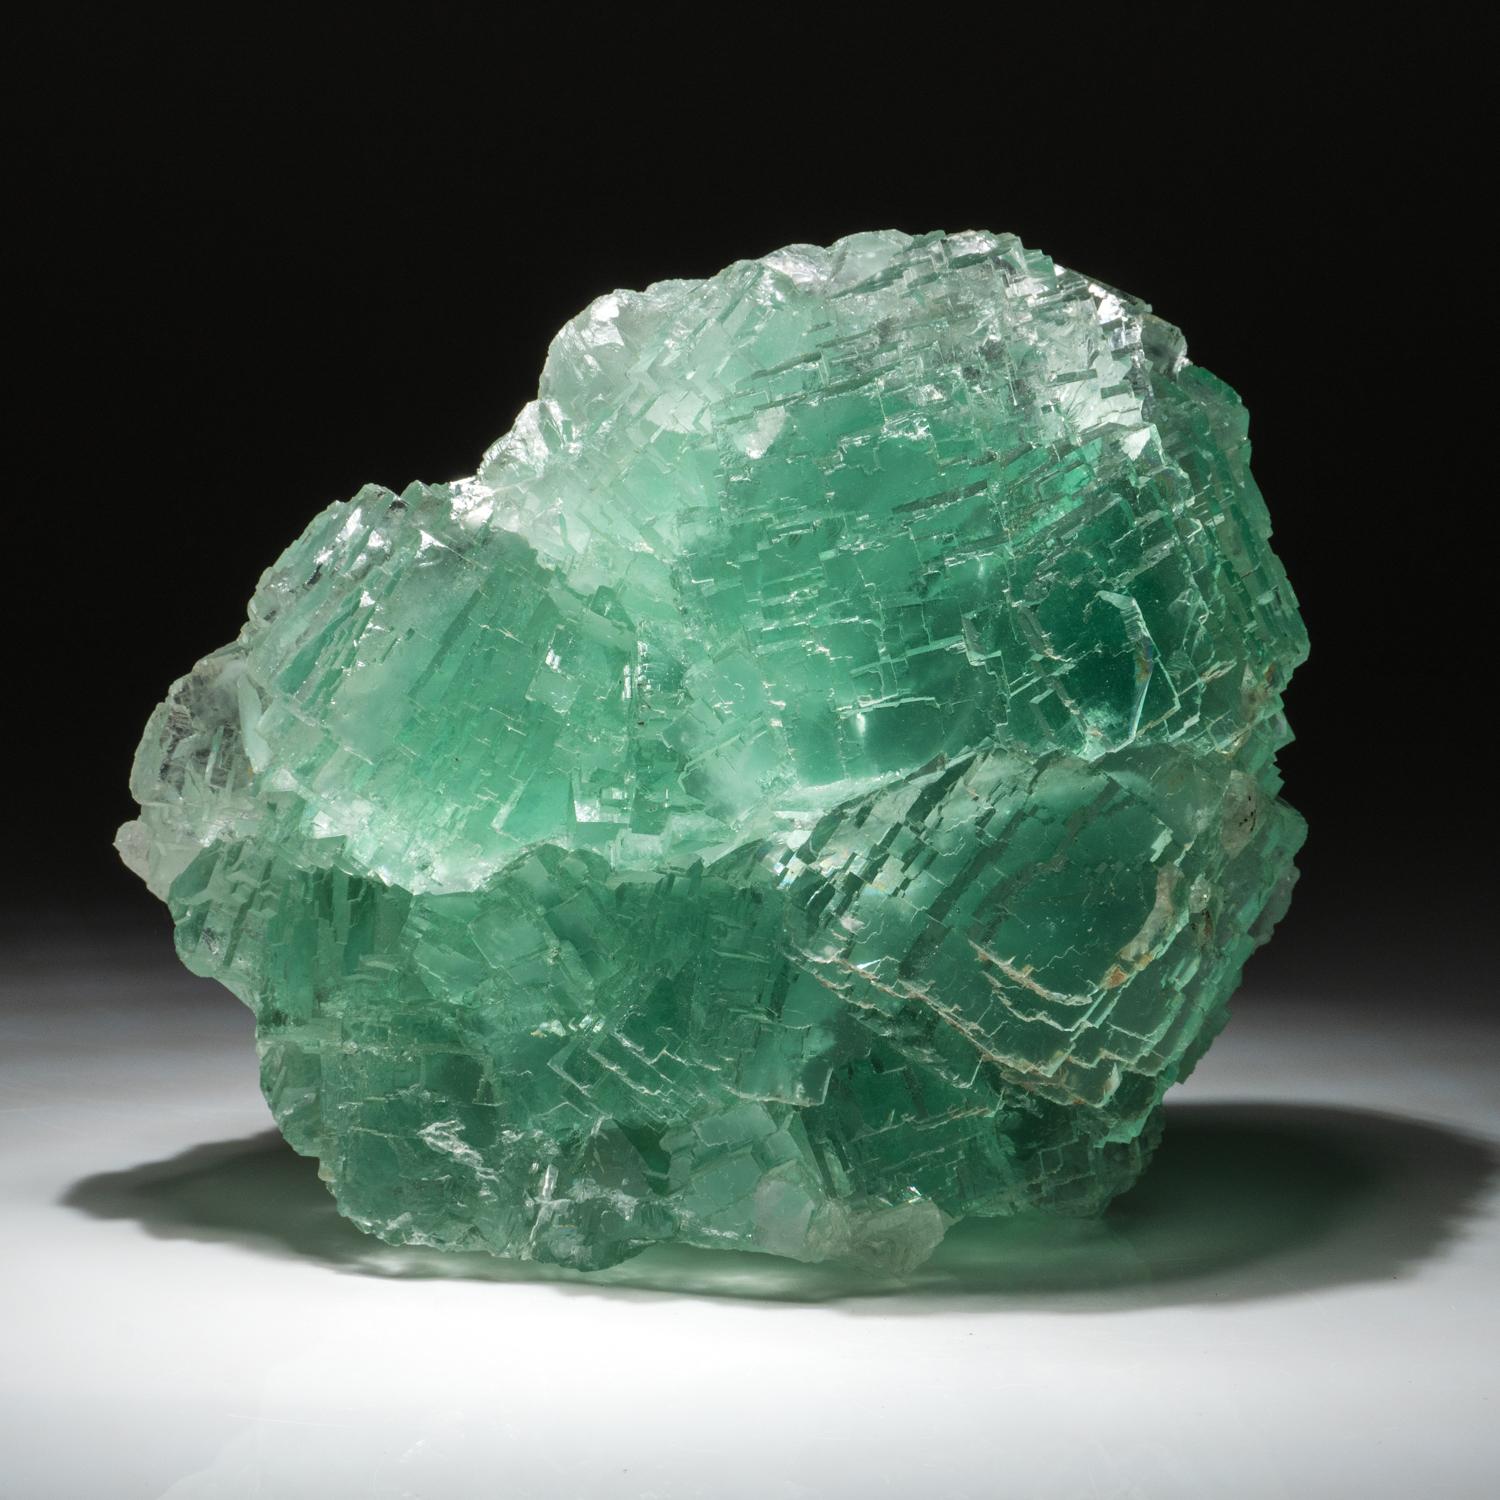 From Naica Mine, Saucillo, Chihuahua, Mexico

Transparent cubic cluster with several interpenetrate-twinned crystals of blue to emerald green fluorite with no matrix attached. The crystals have smooth lustrous faces with sharp terminations. 

8